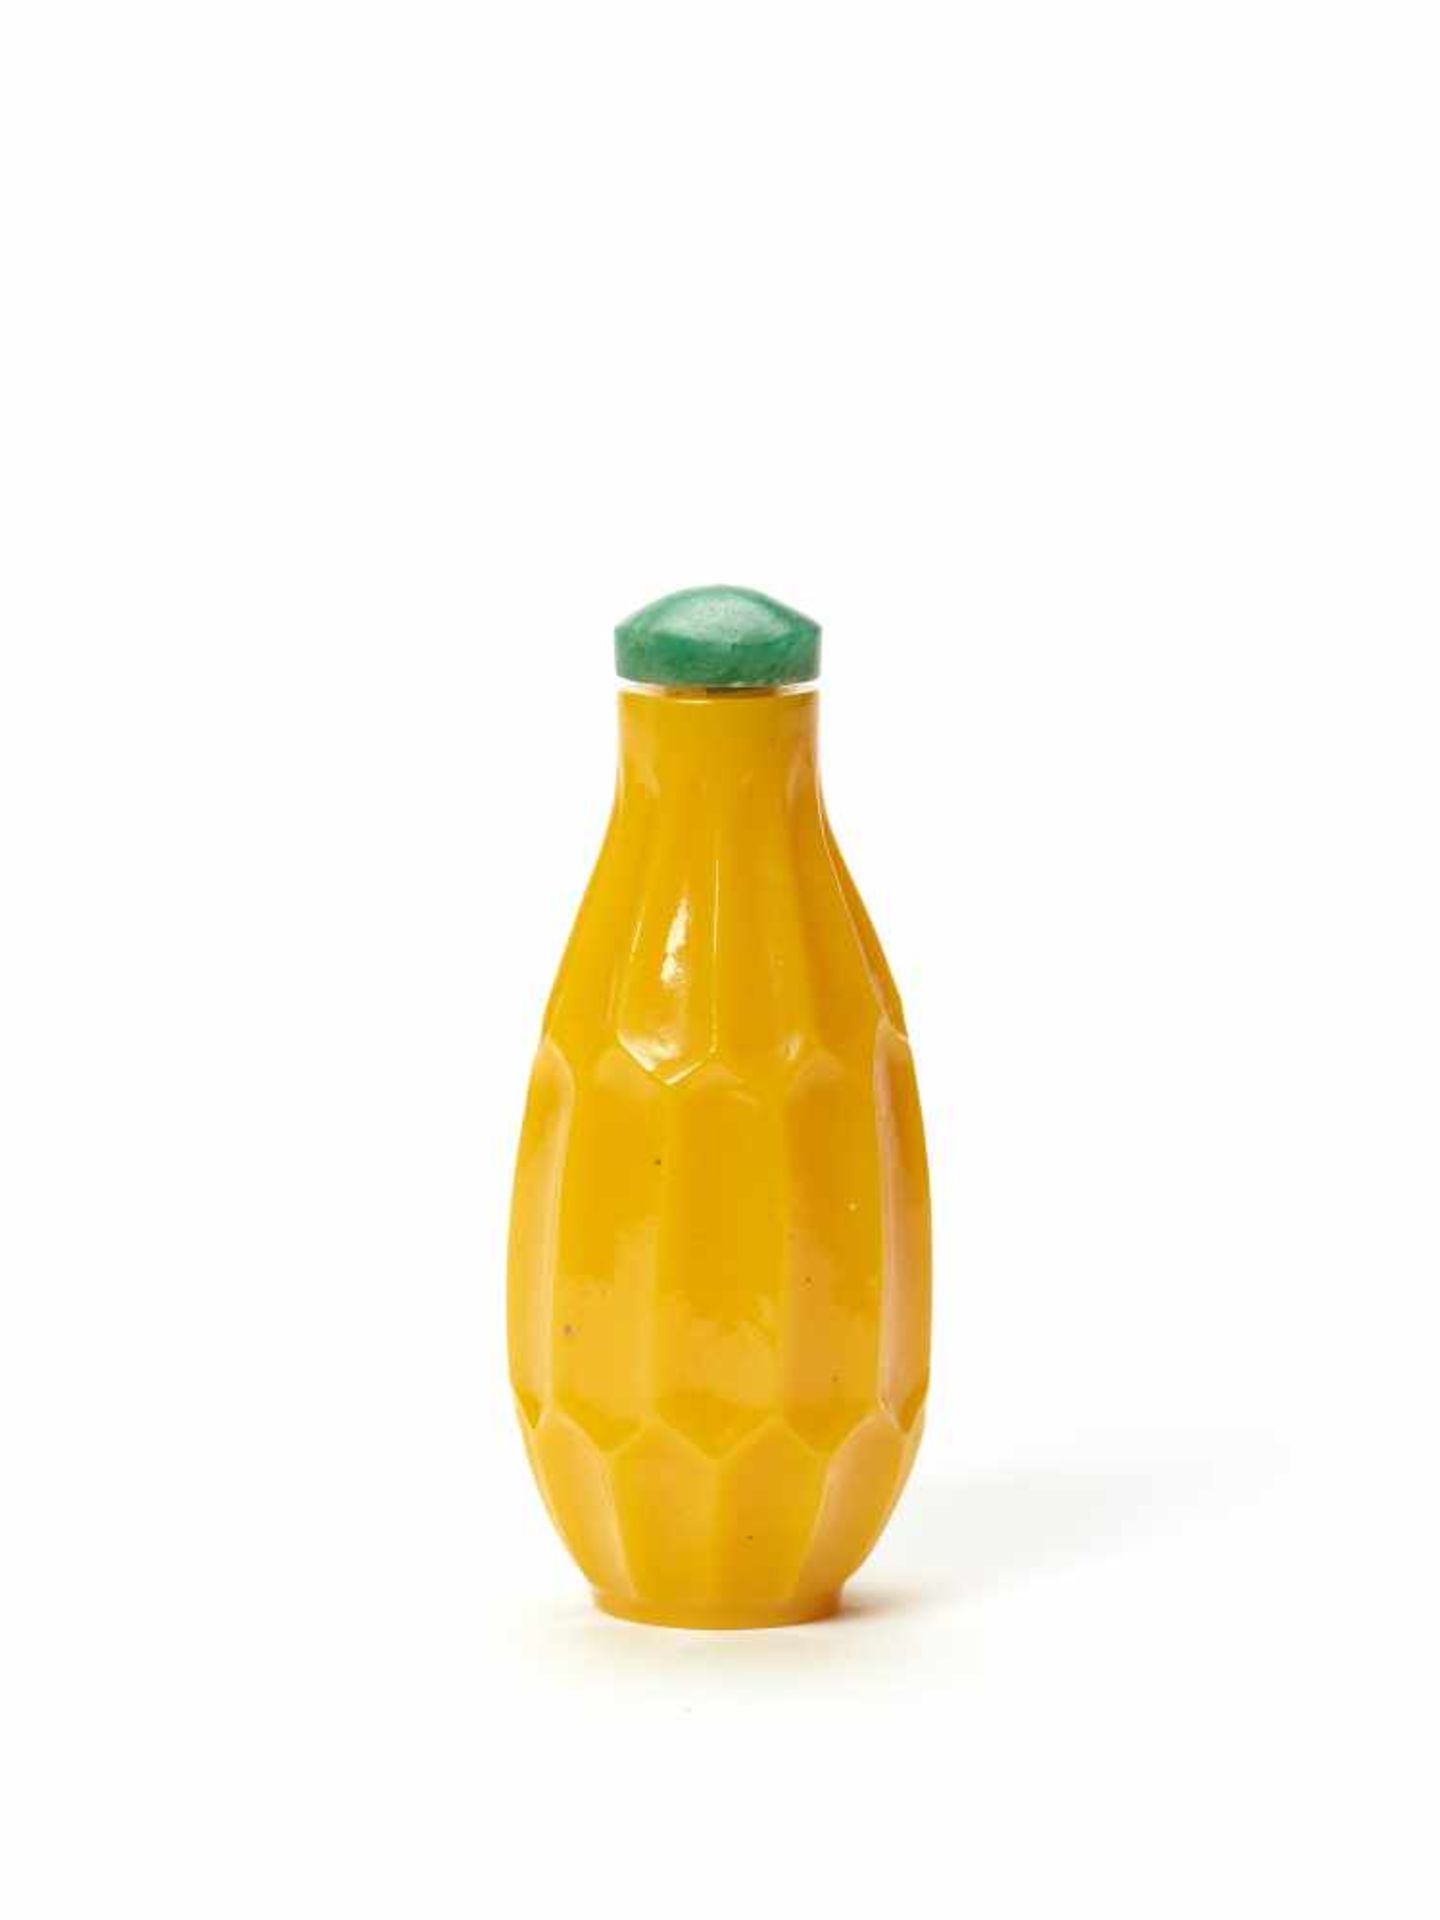 A DAOGUANG MARK AND PERIOD ‘IMPERIAL YELLOW’ FACETED GLASS SNUFF BOTTLEGlassChina, Daoguang mark and